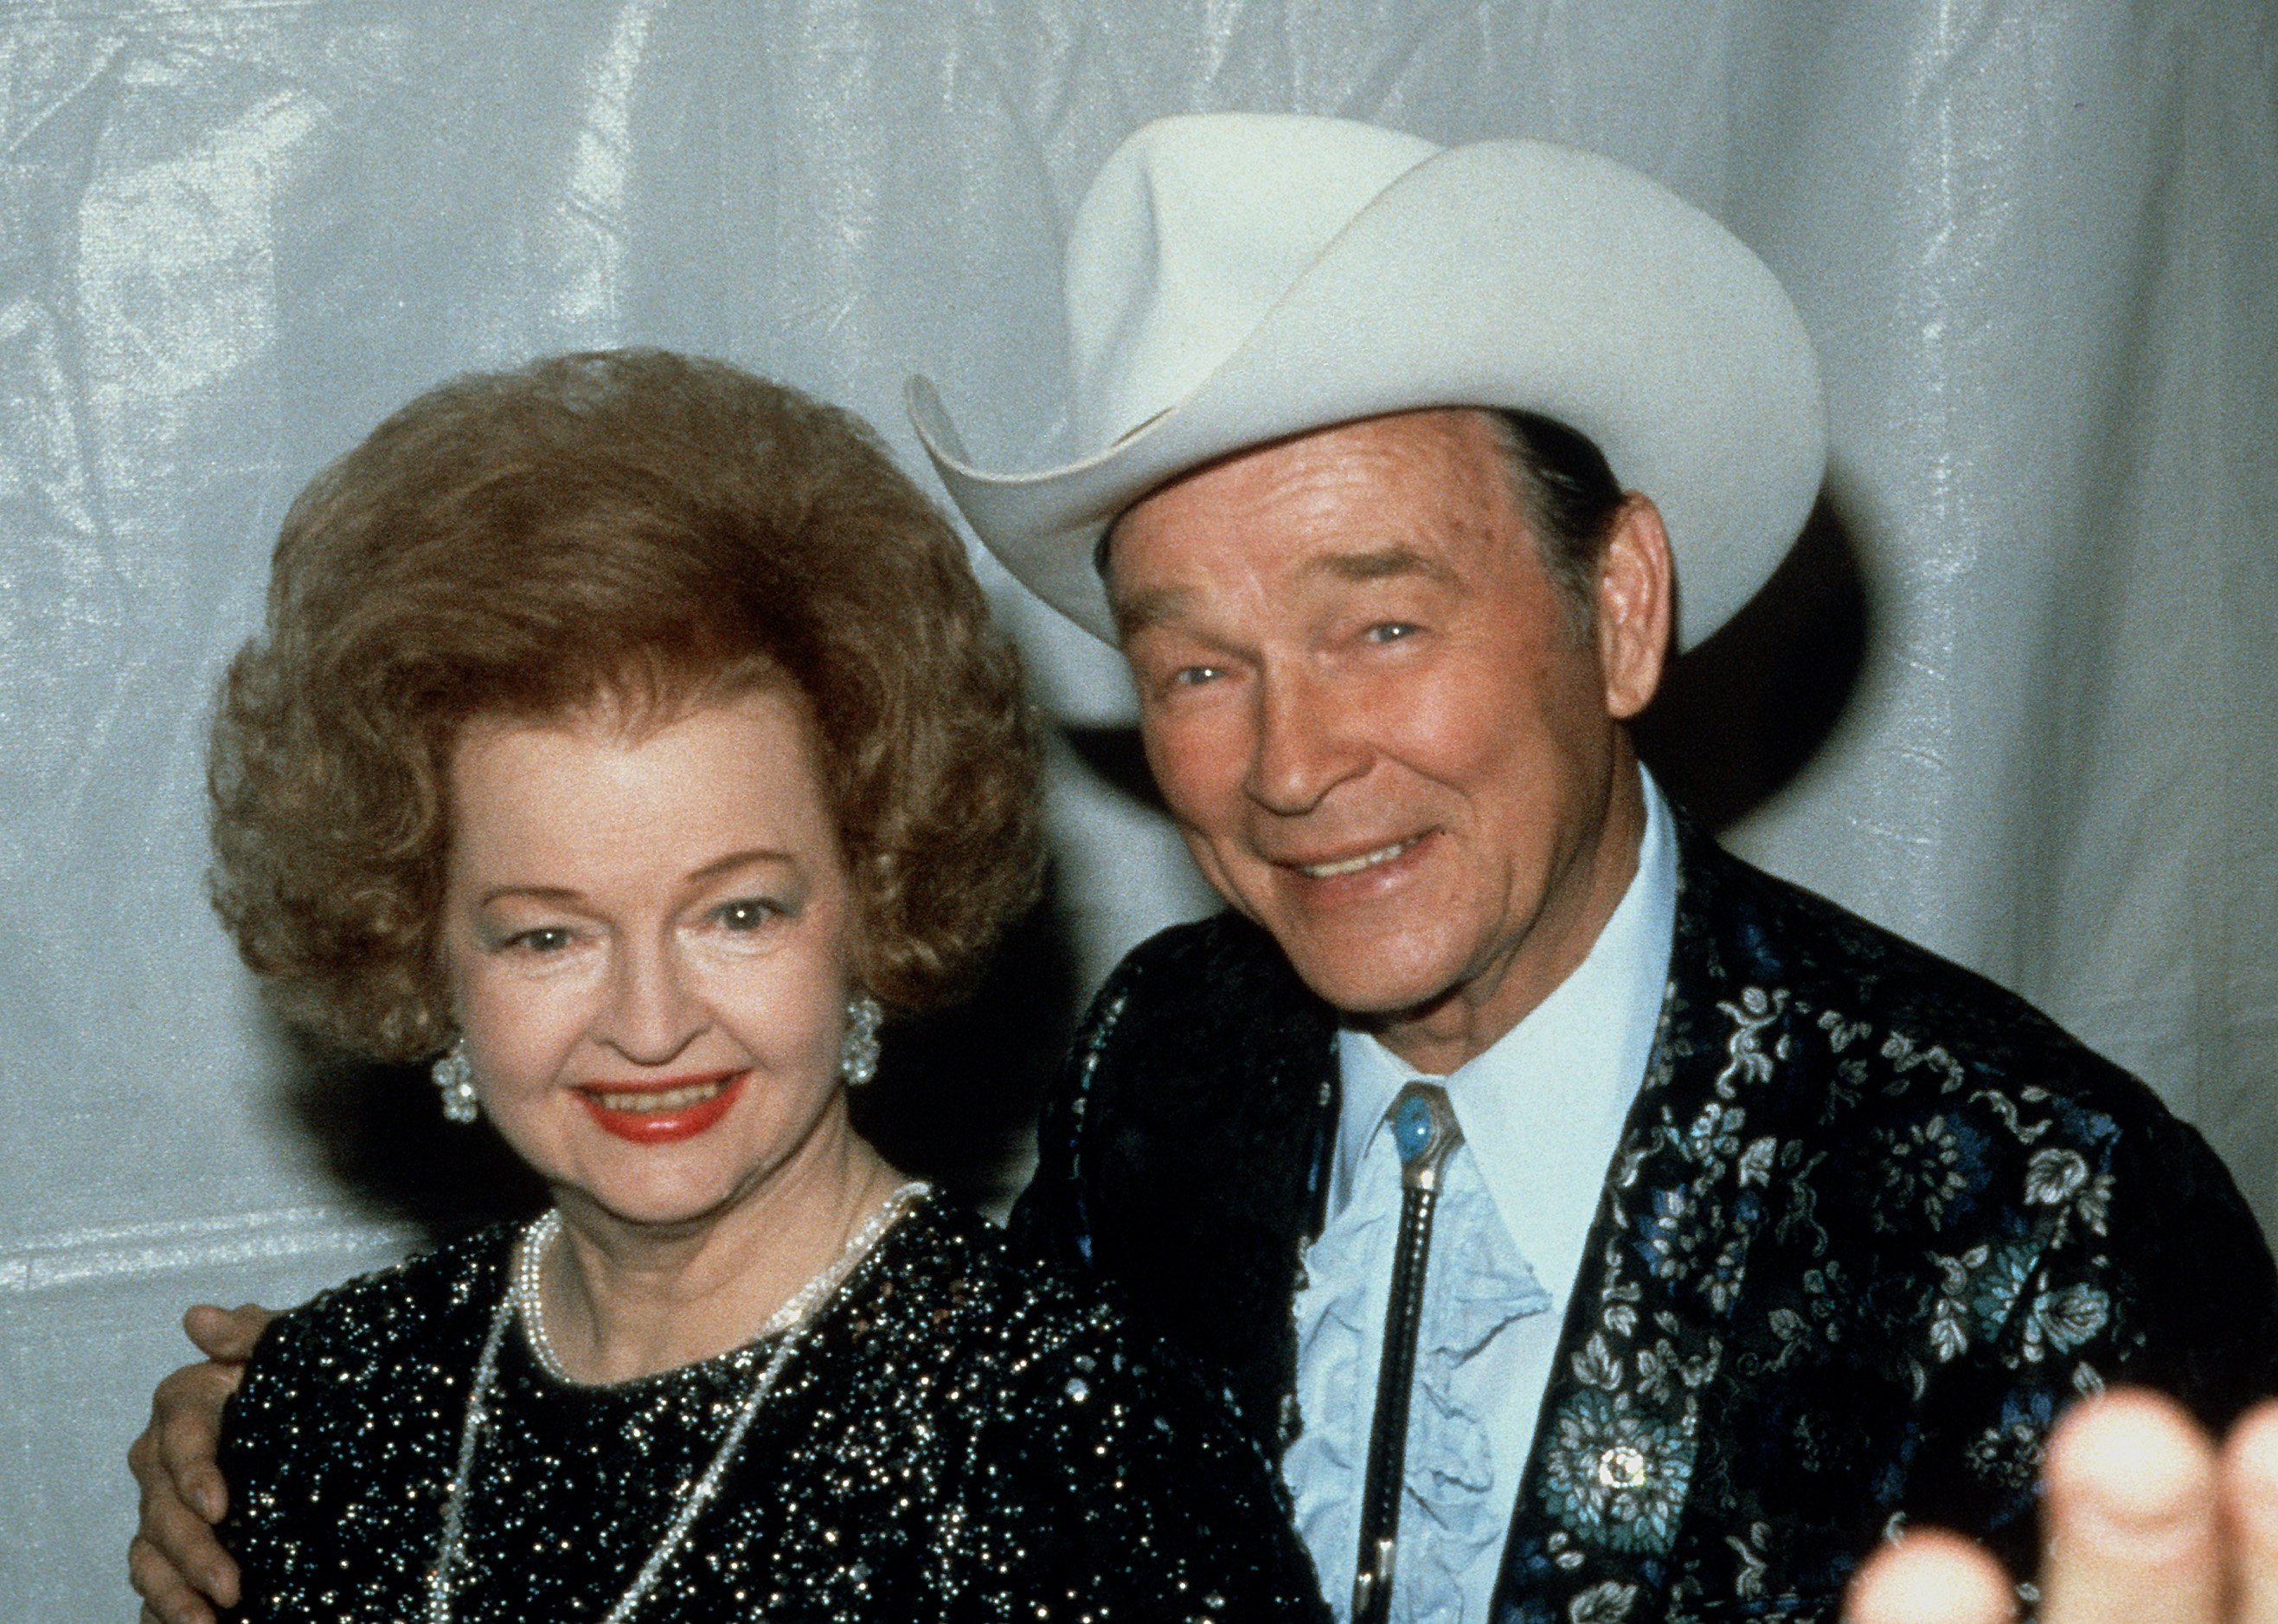 Roy Rogers (1911 - 1998) and his wife Dale Evans (1912 - 2001) pose circa 1986. | Source: Getty Images.